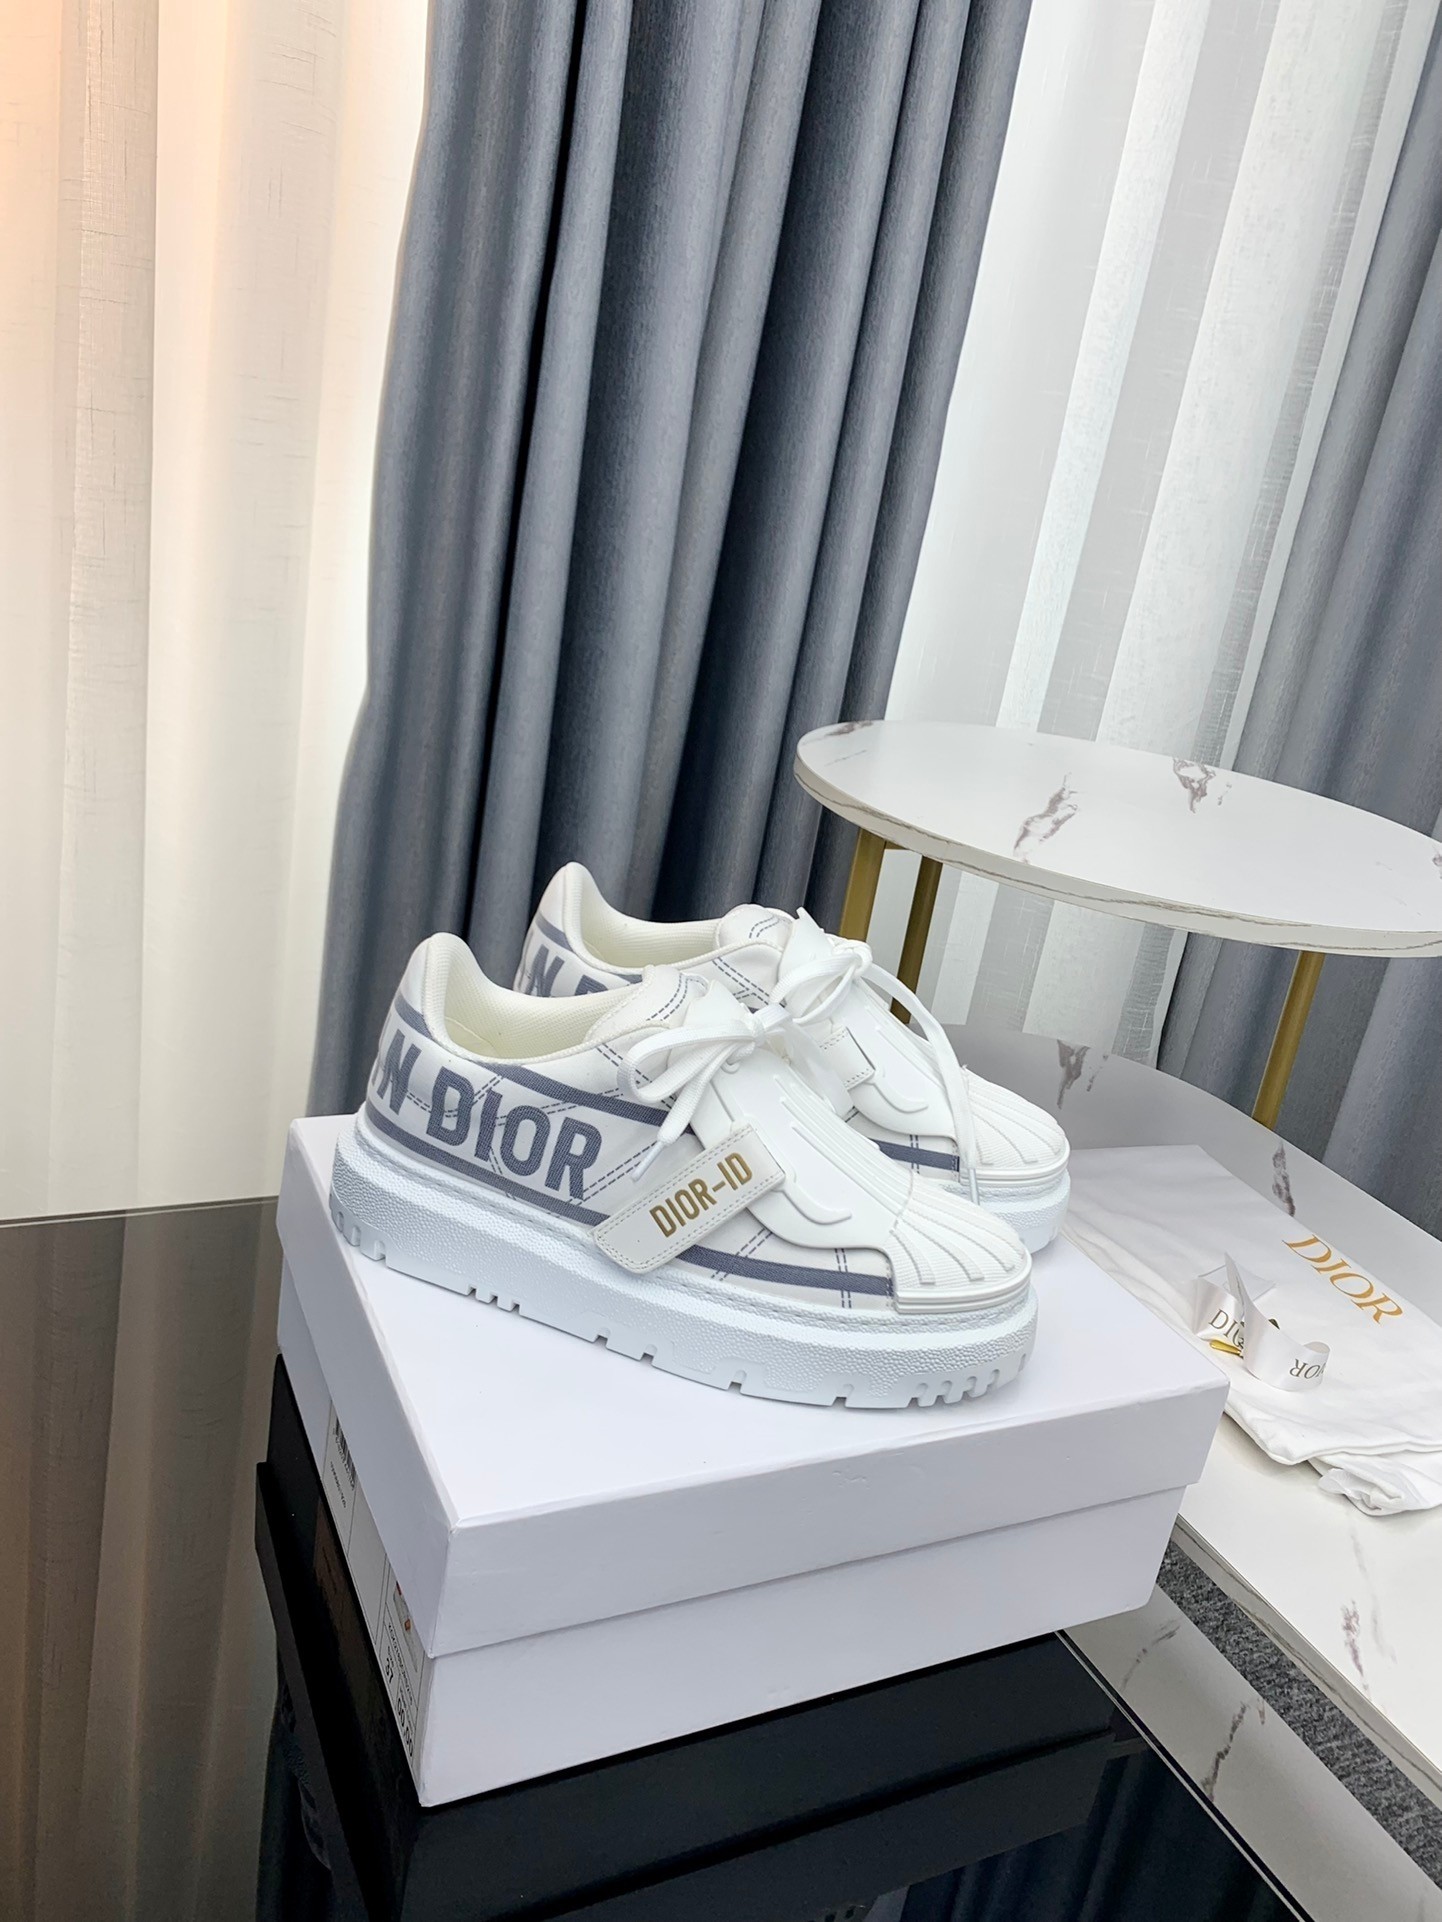 Dior Skateboard Shoes Sneakers Gold White Cowhide Spring Collection Casual